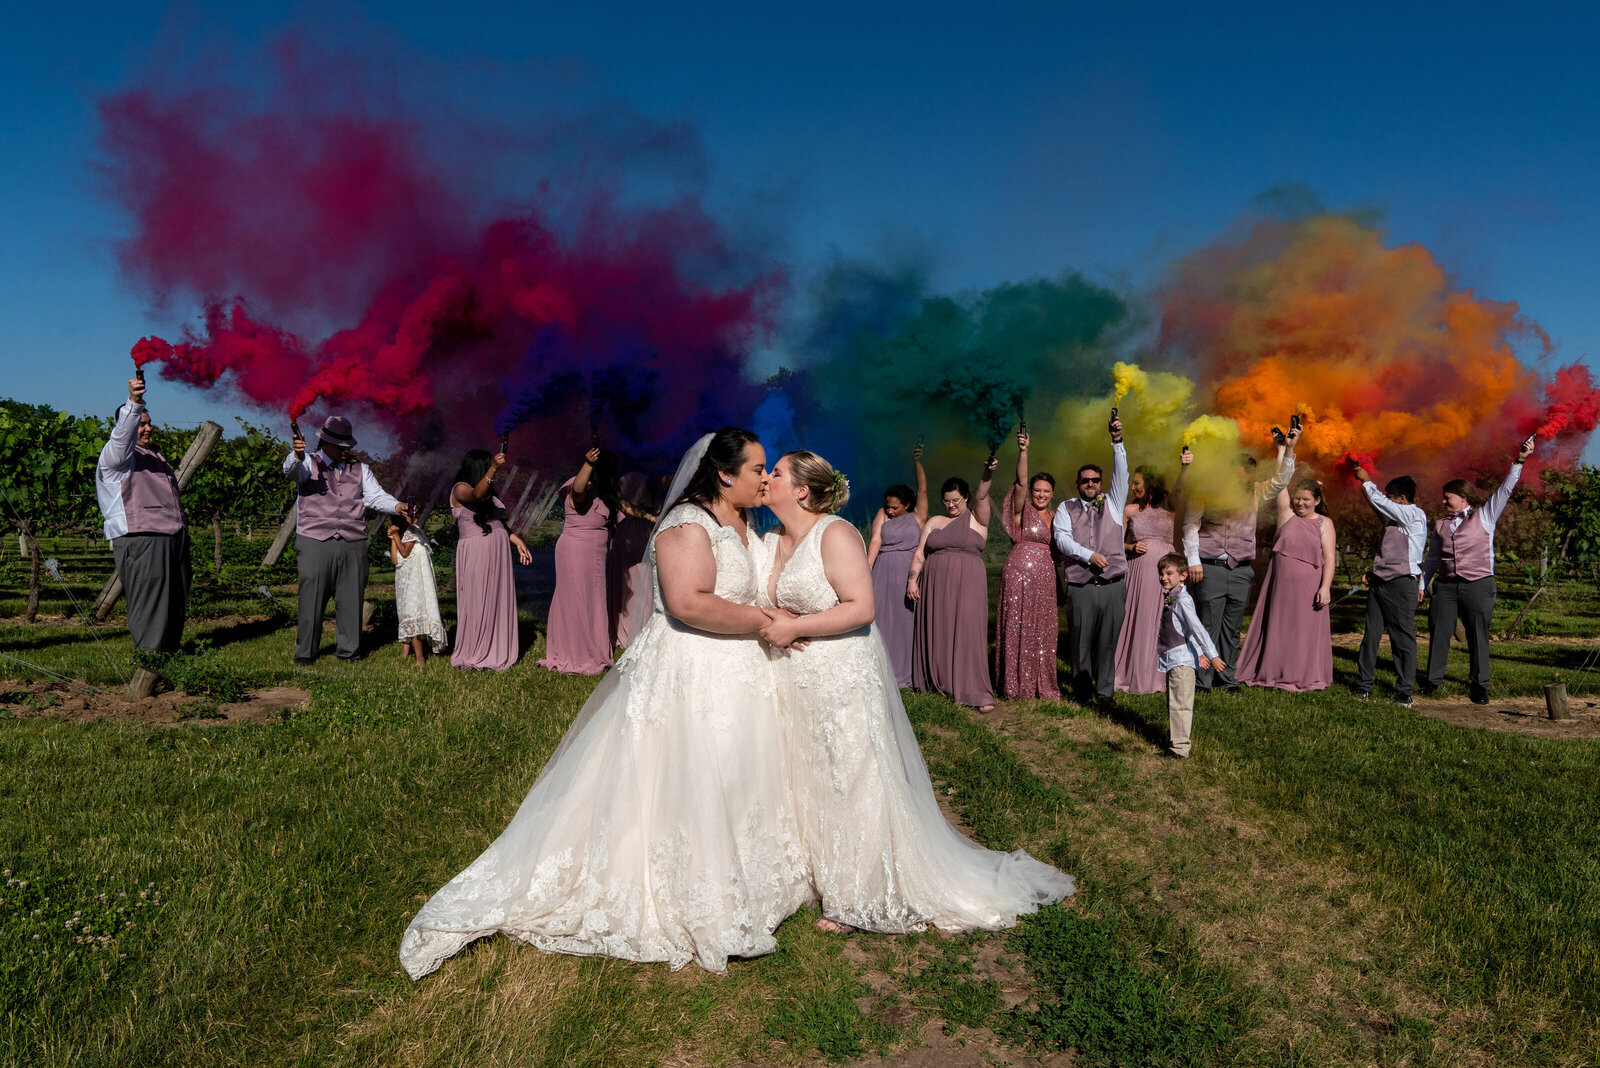 Lesbian brides kiss in front of rainbow colored smoke on their wedding day.